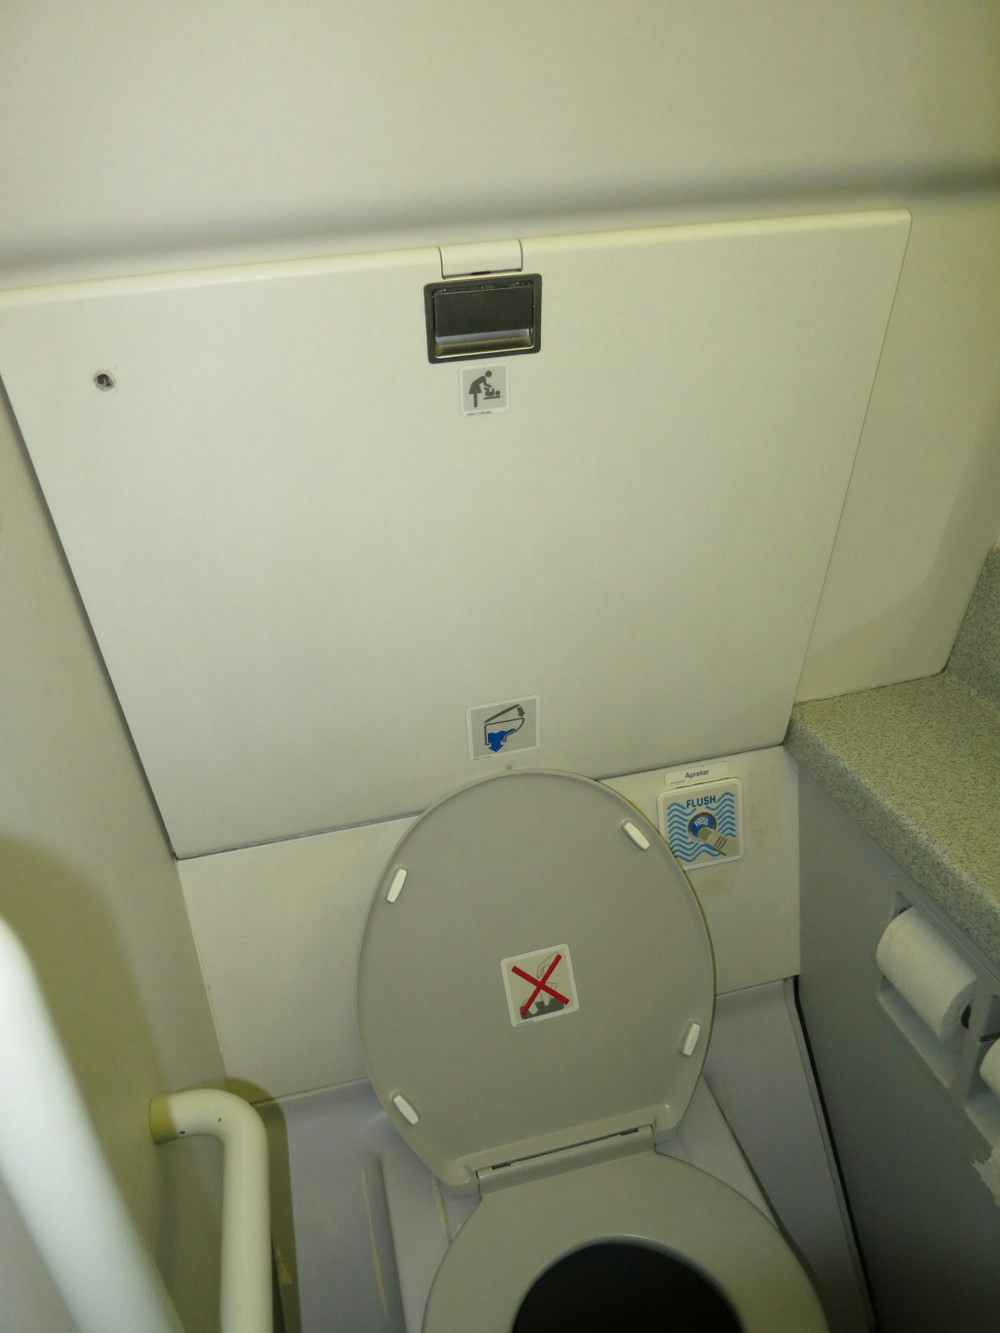 Every JetBlue plane has a changing table in their bathrooms.